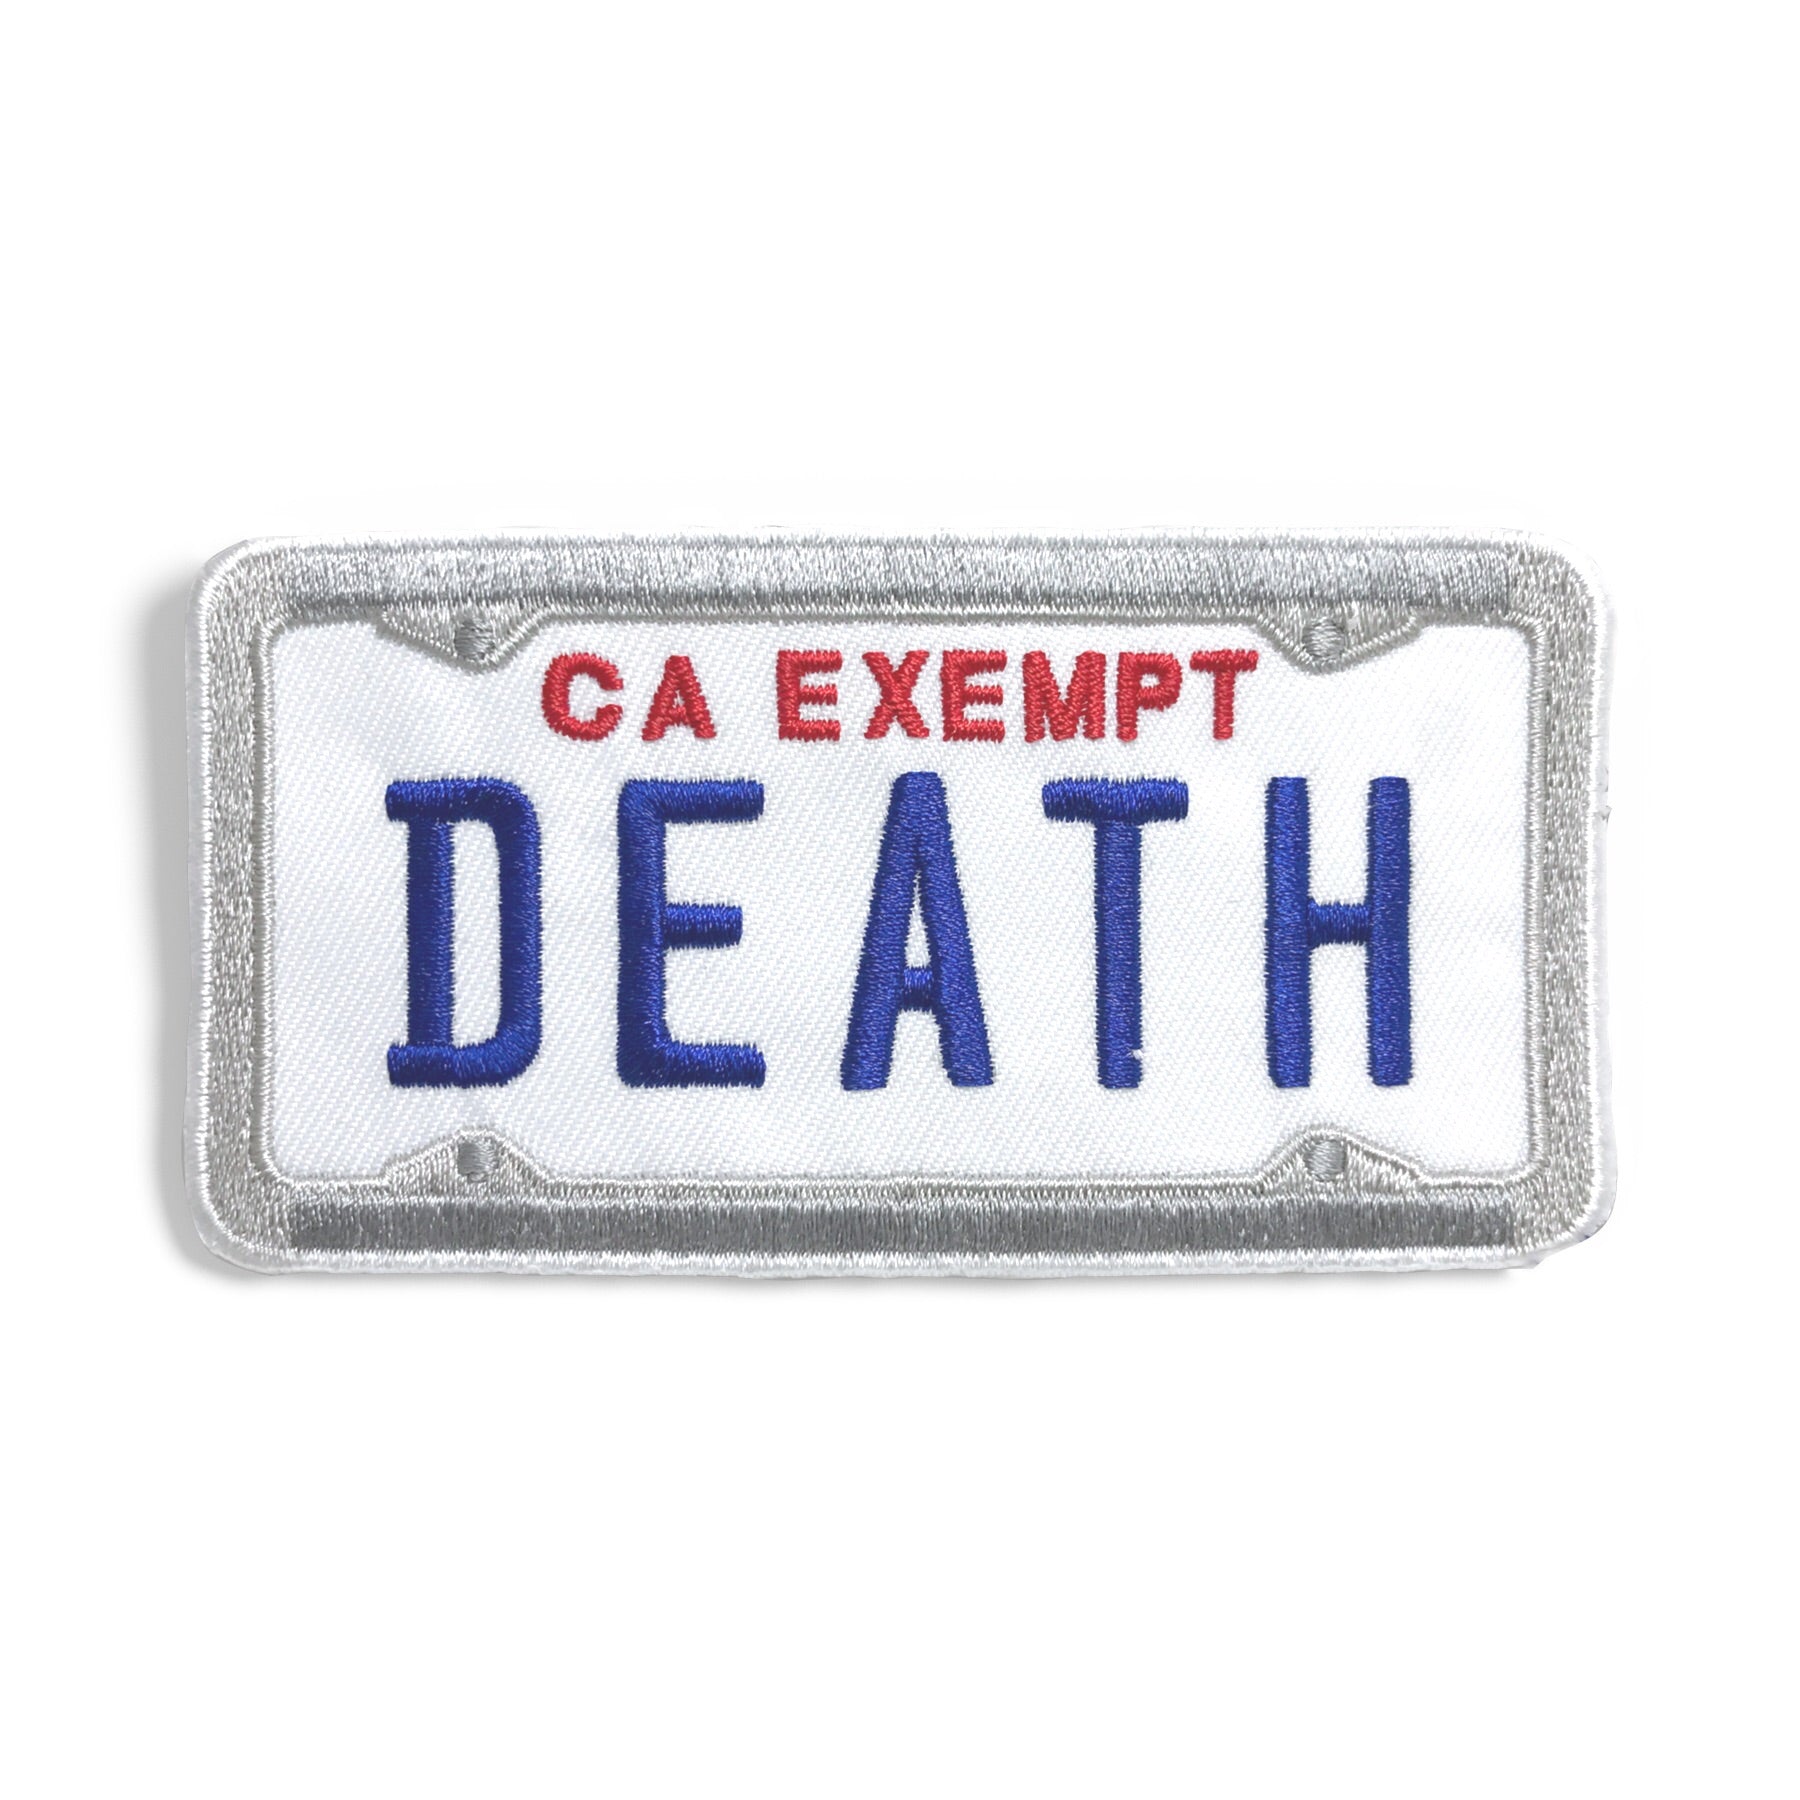 Government Plate patch